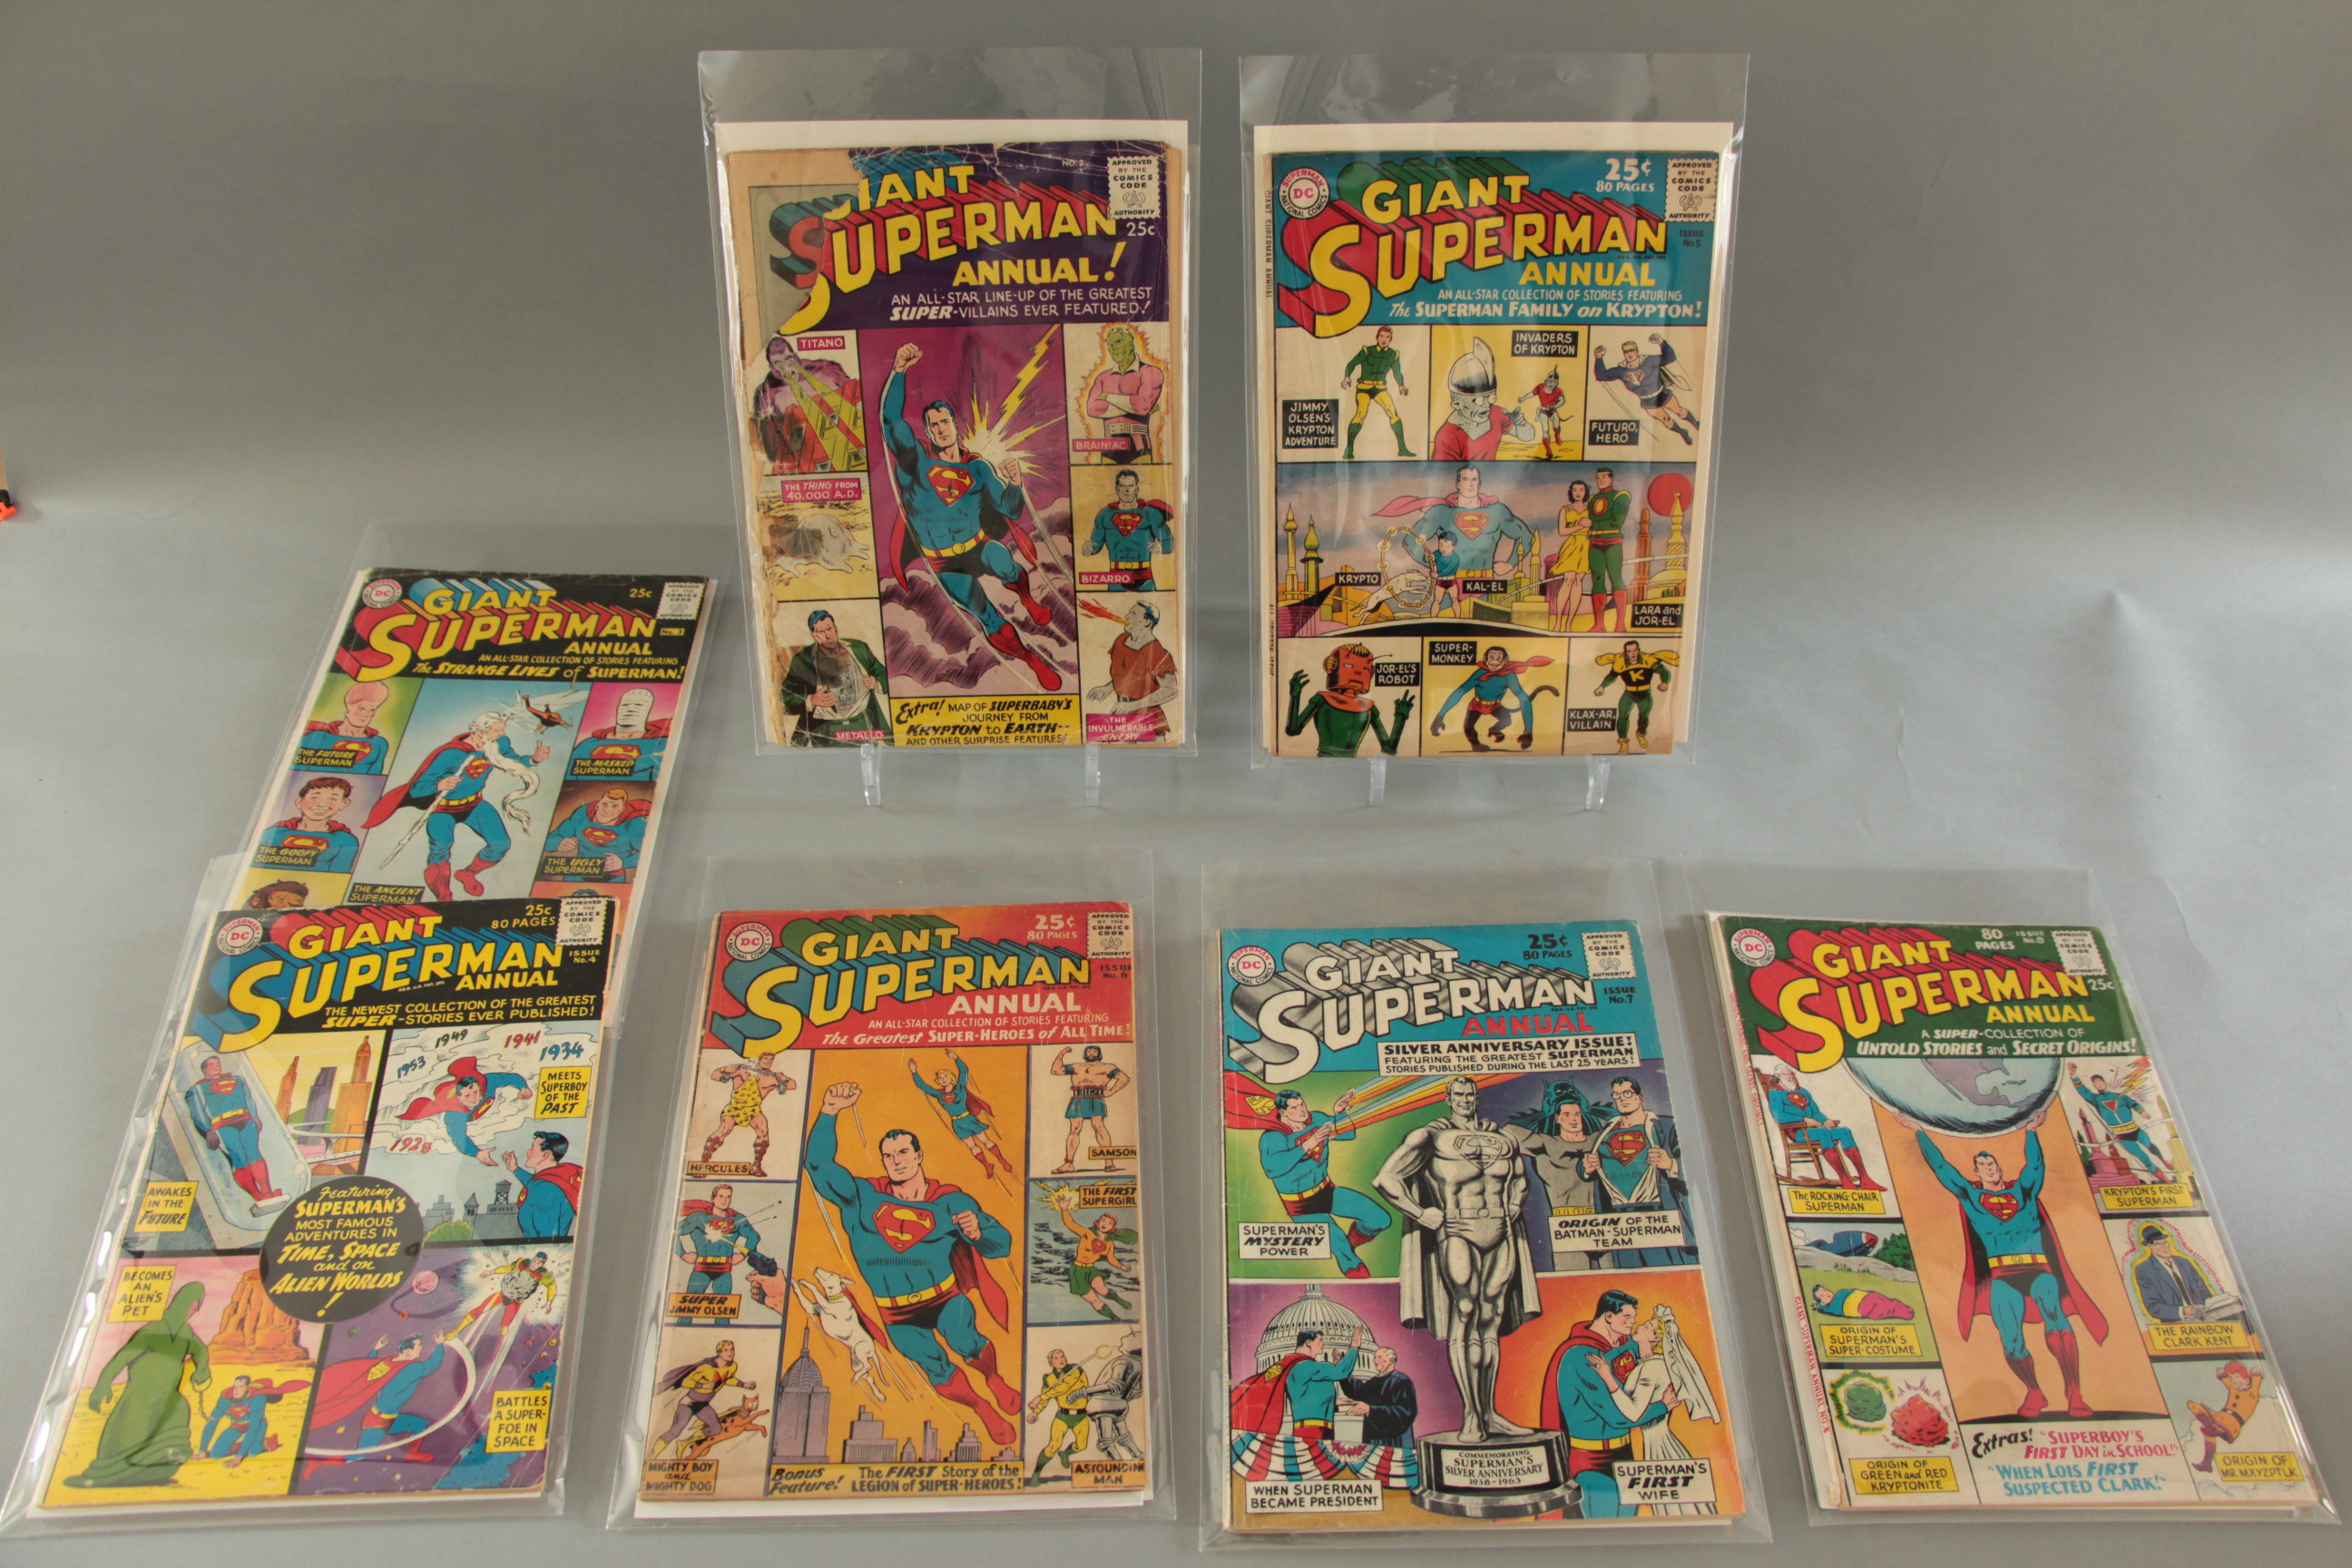 Set of 7 Superman Giant Annuals from the 1960's including Giant Annual #2 SUPER VILLAINS in fair